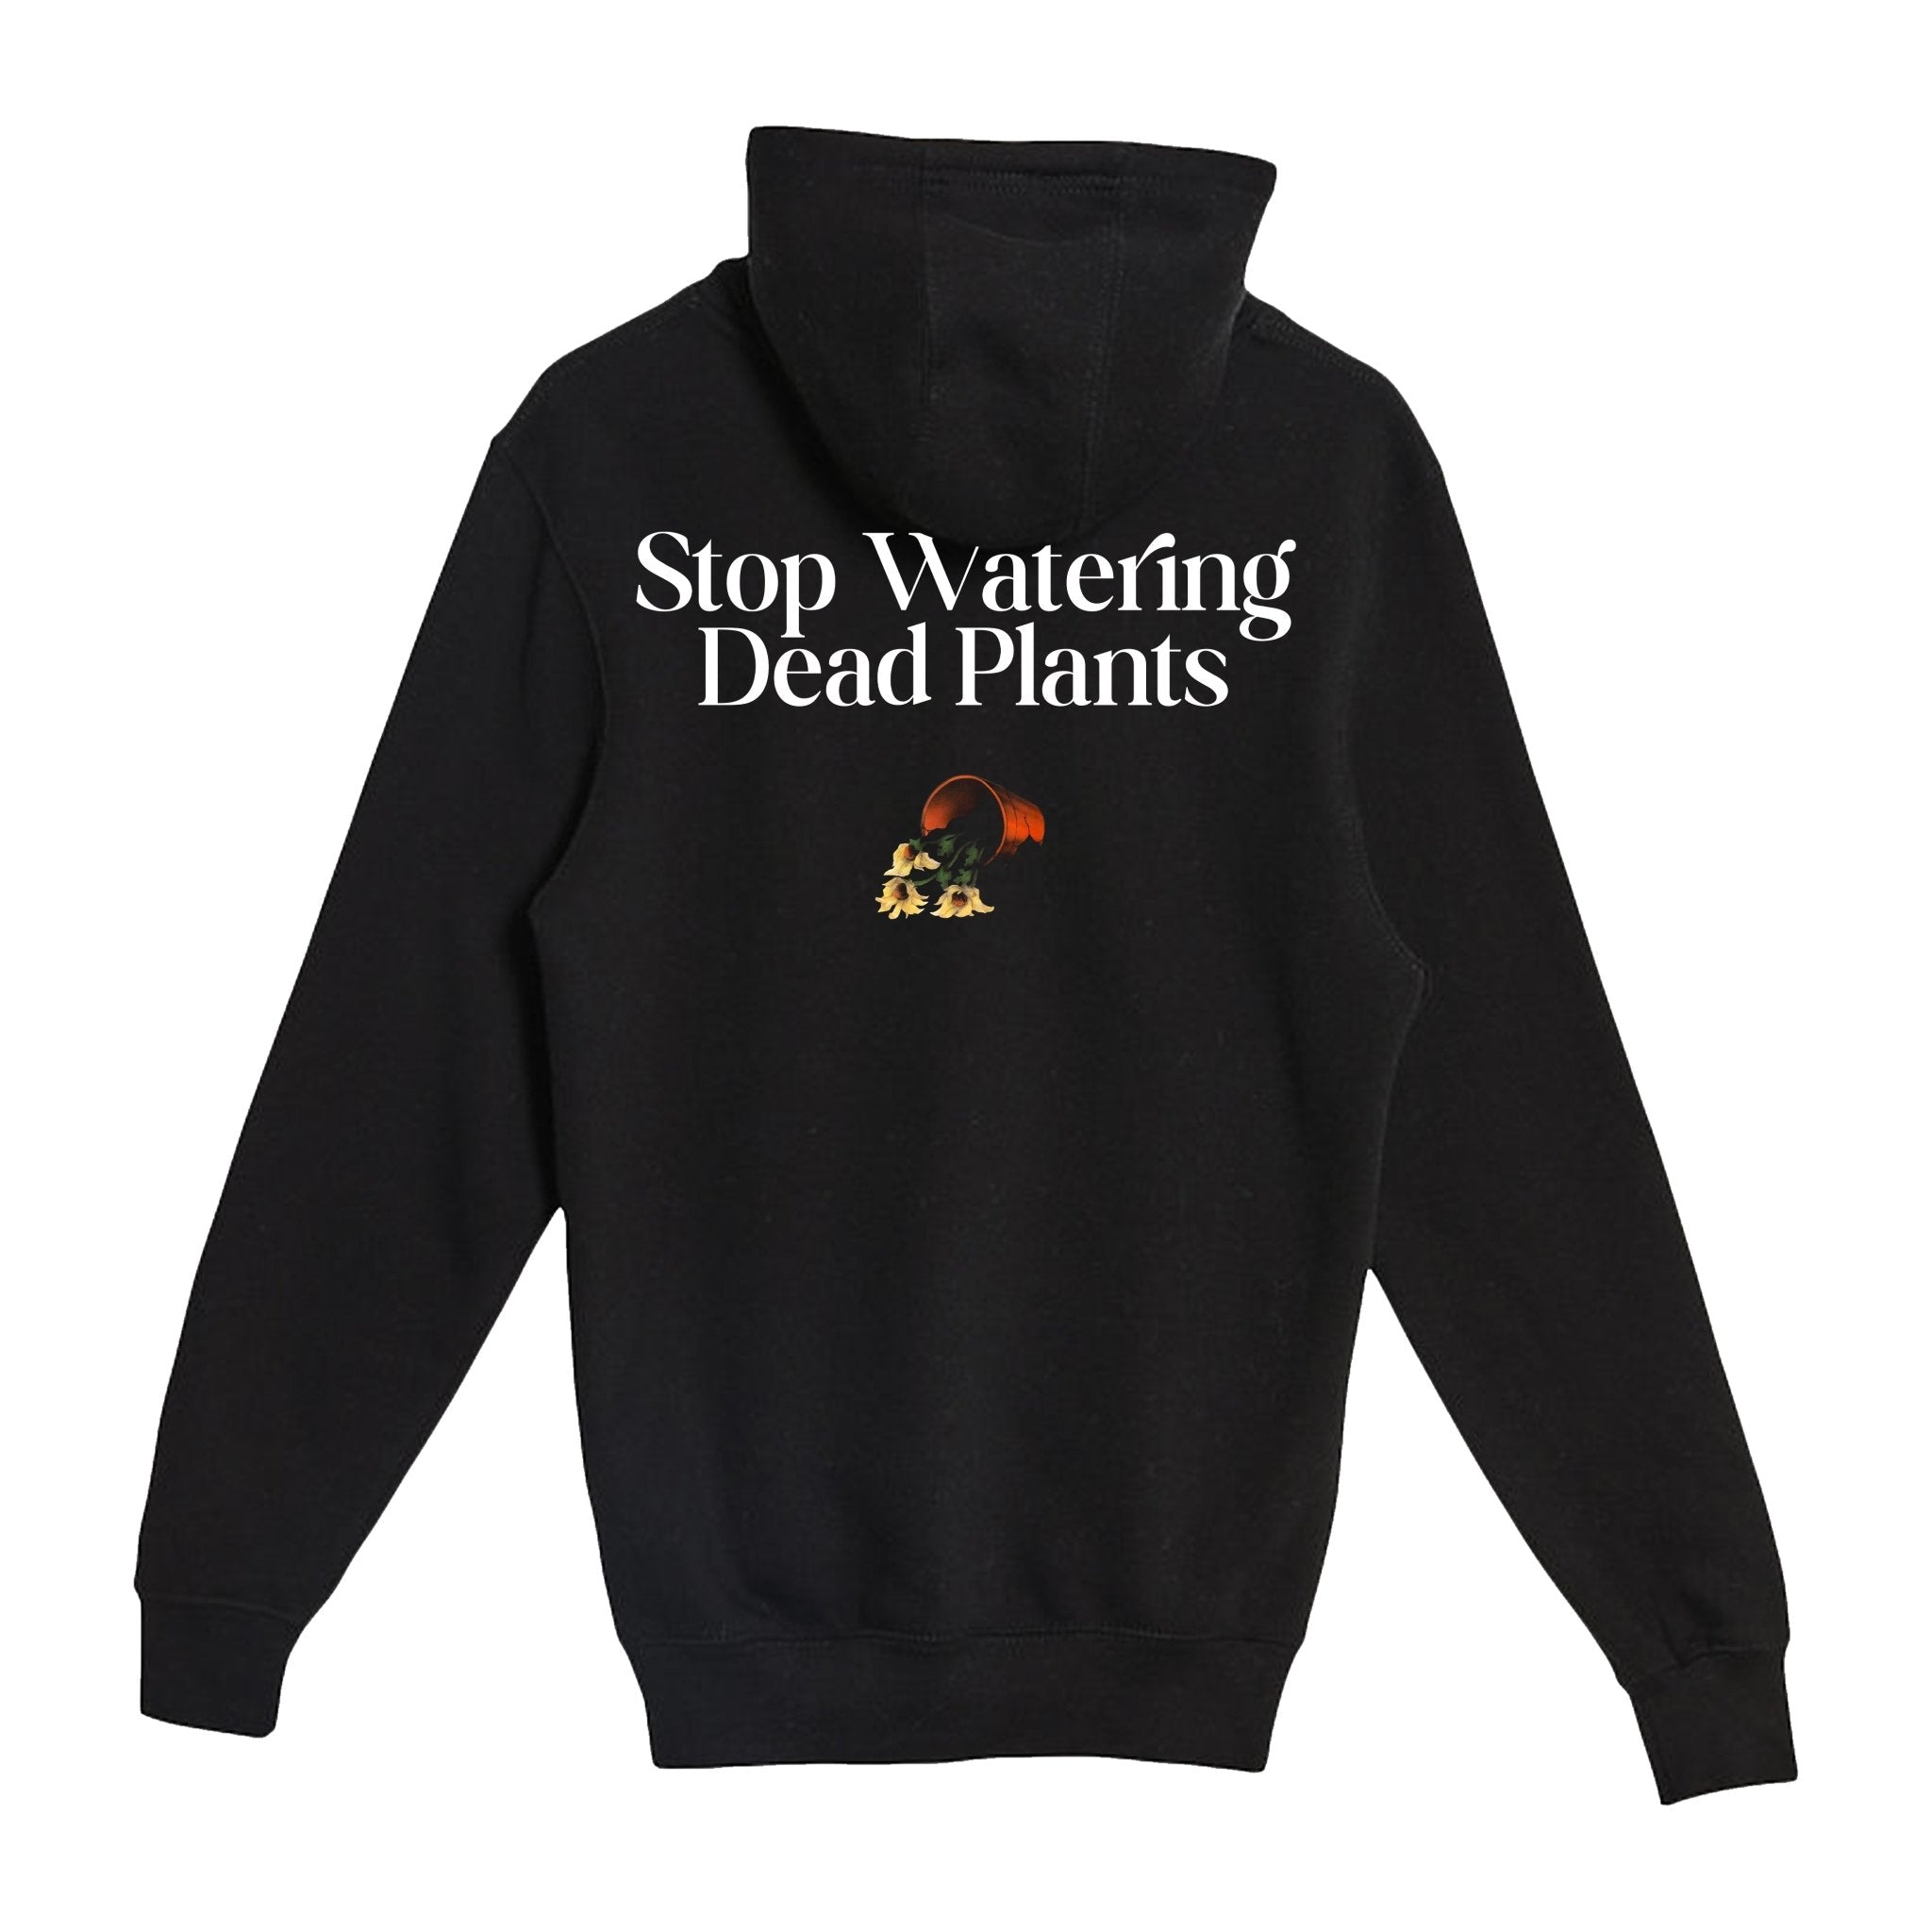 Stop Watering Dead Plants All Collection - trainofthoughtcollective